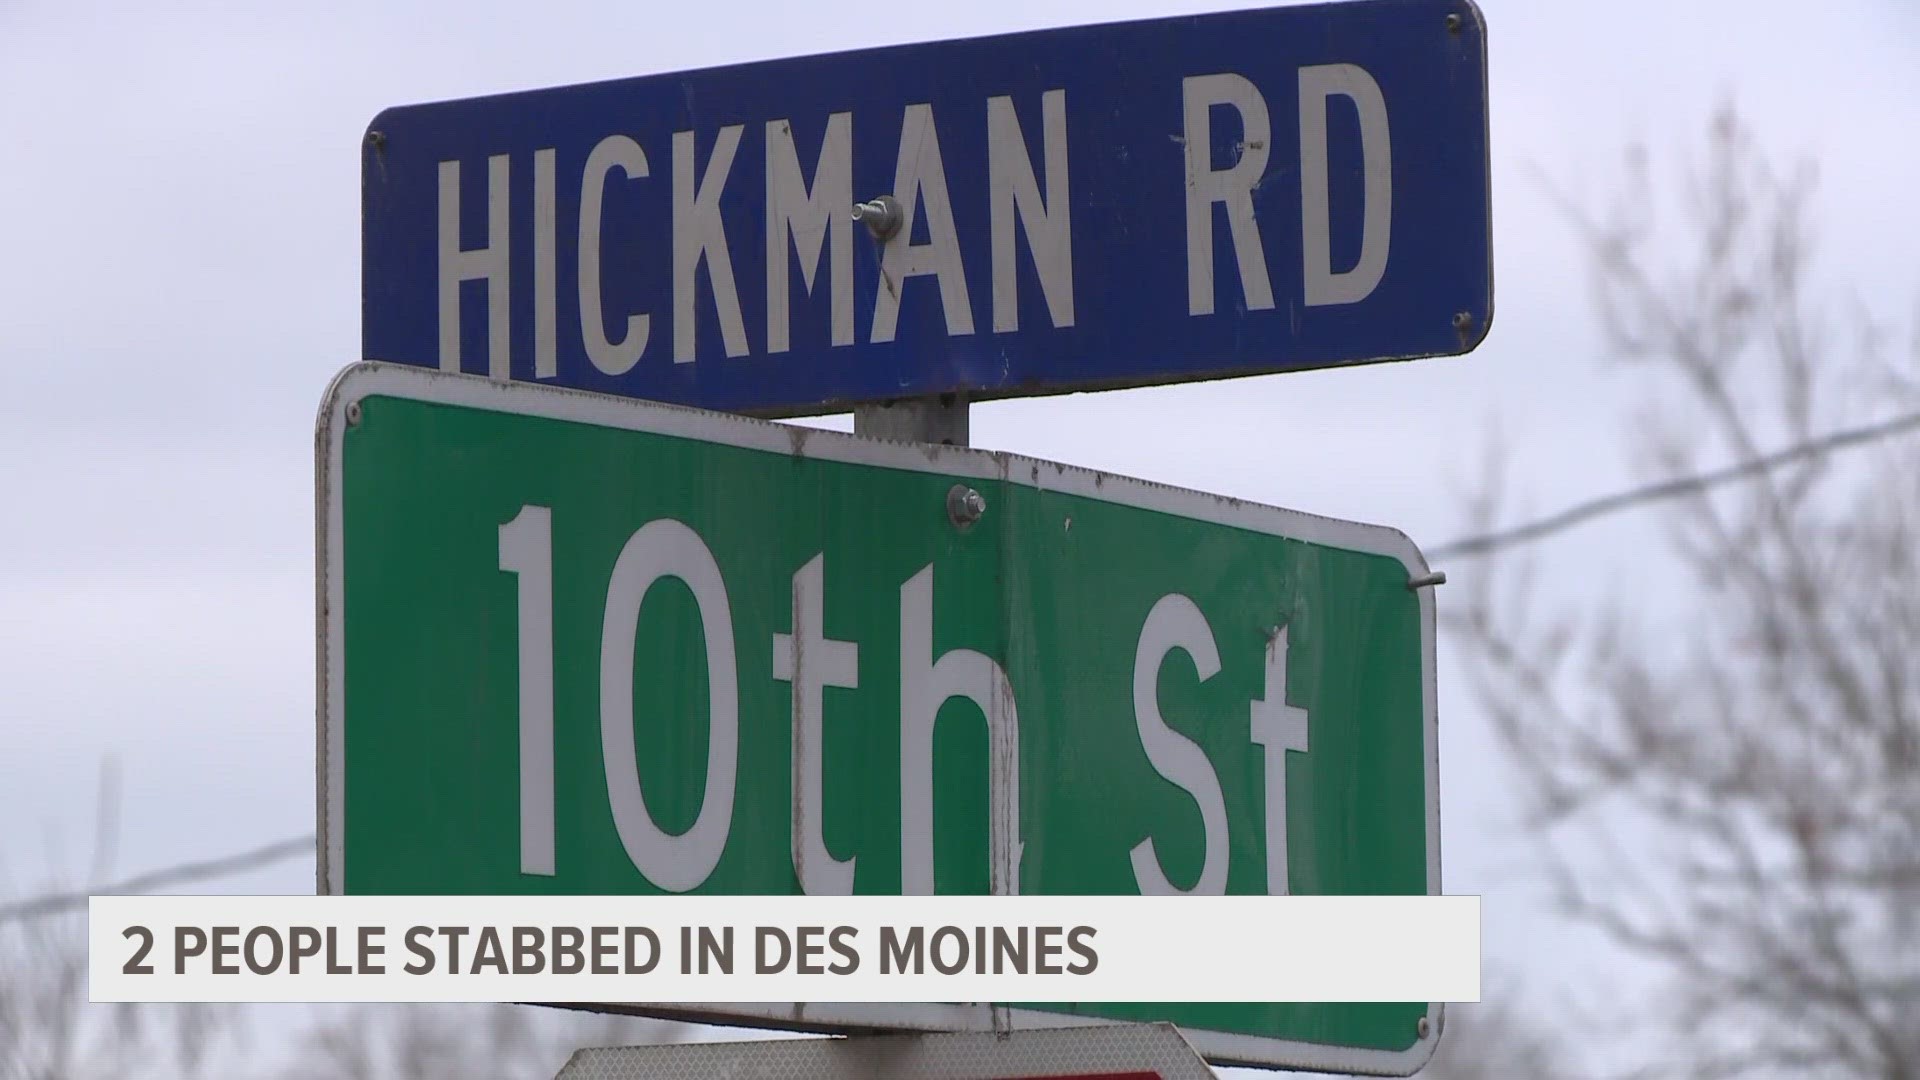 Two people were injured after in a "domestic-related" stabbing incident in northern Des Moines on Sunday afternoon, police shared on X.